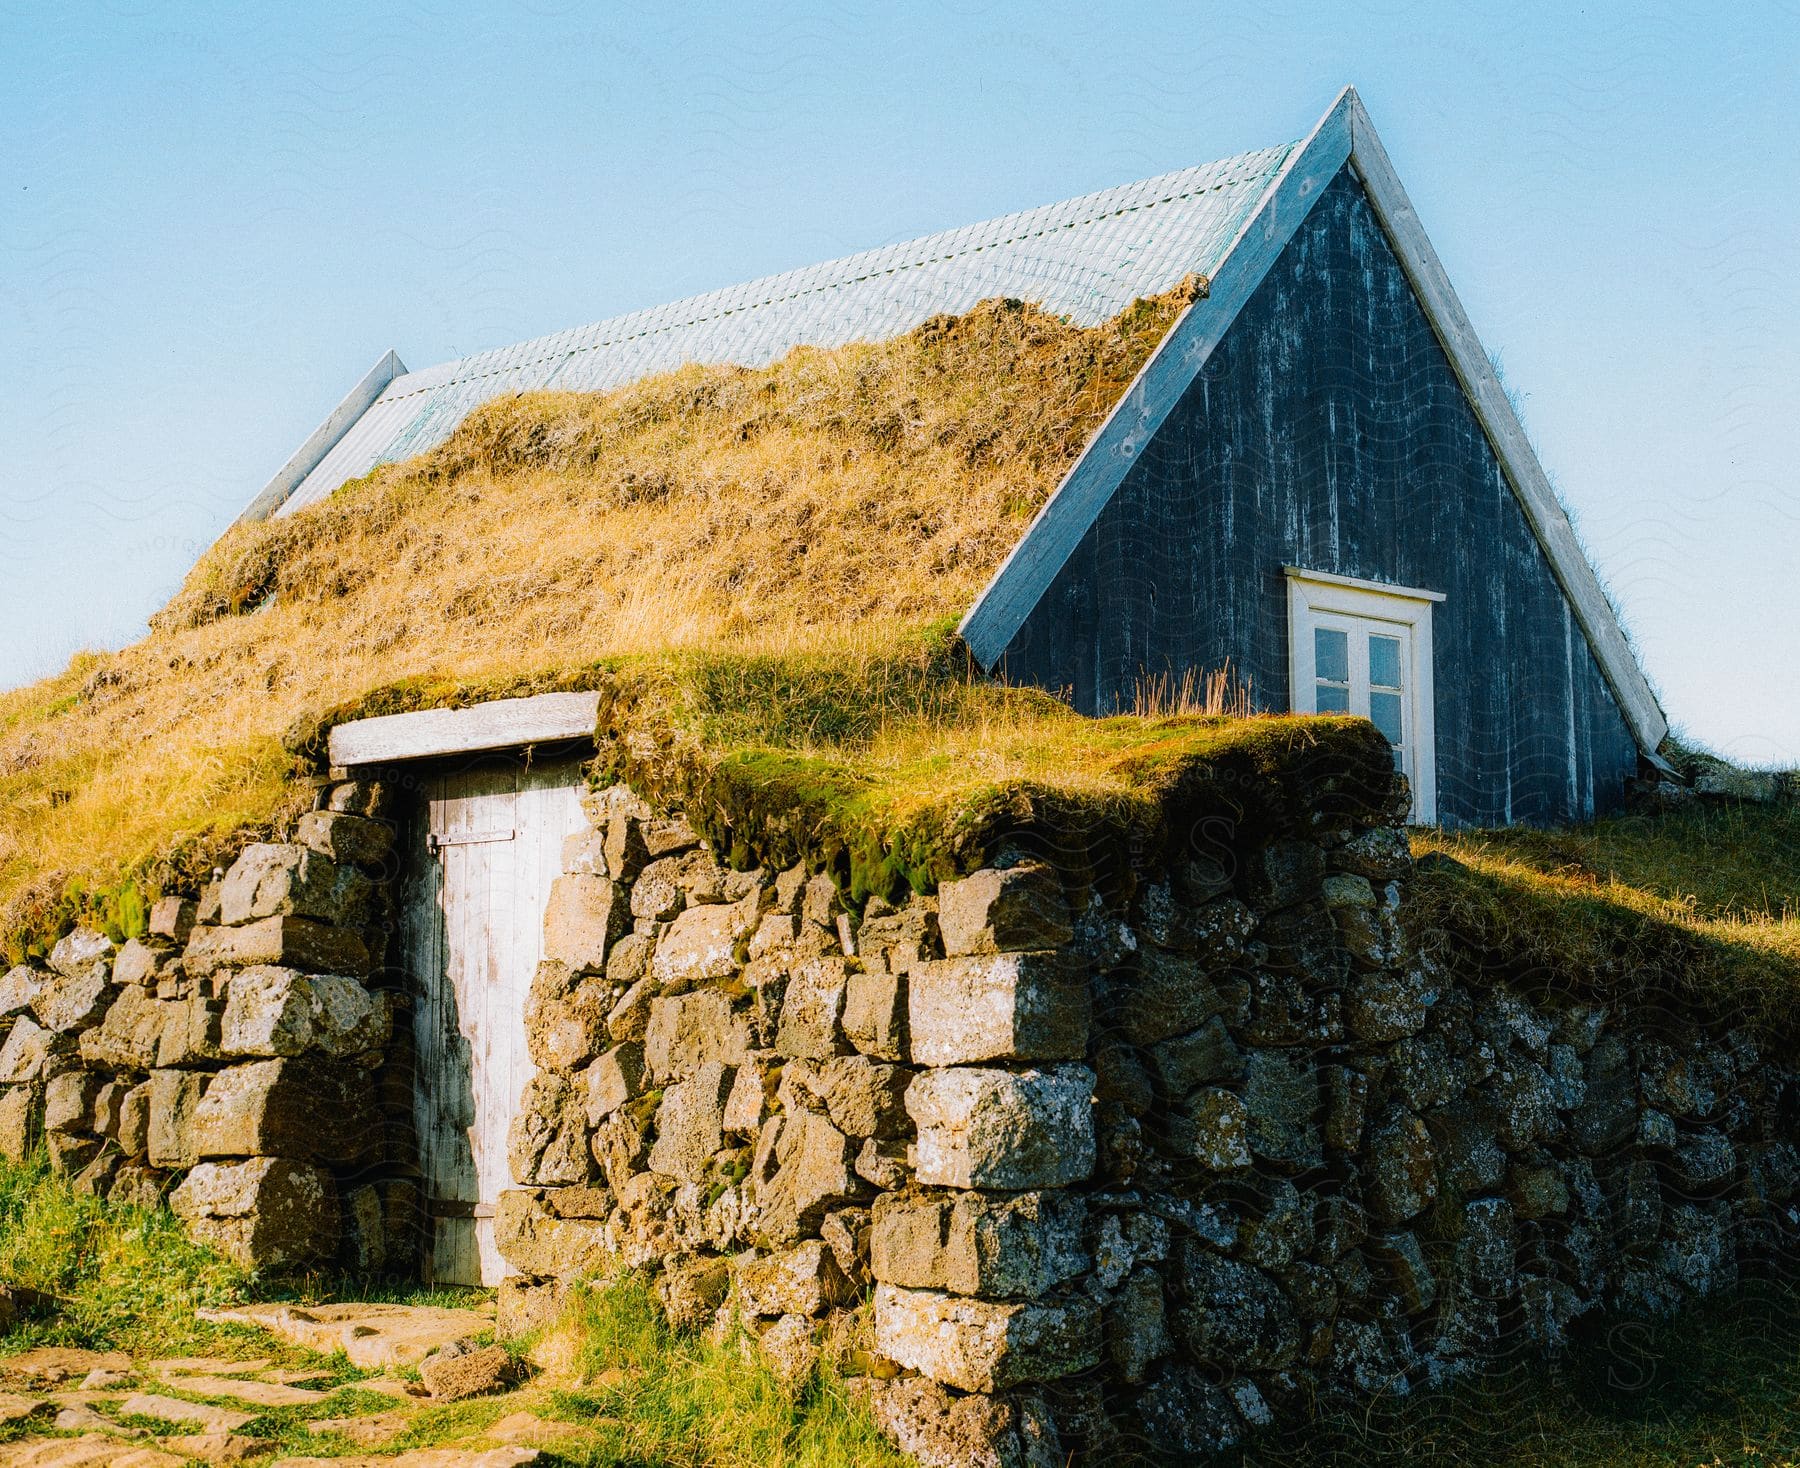 A small hut made of wood, stones and grass during the sunny morning.